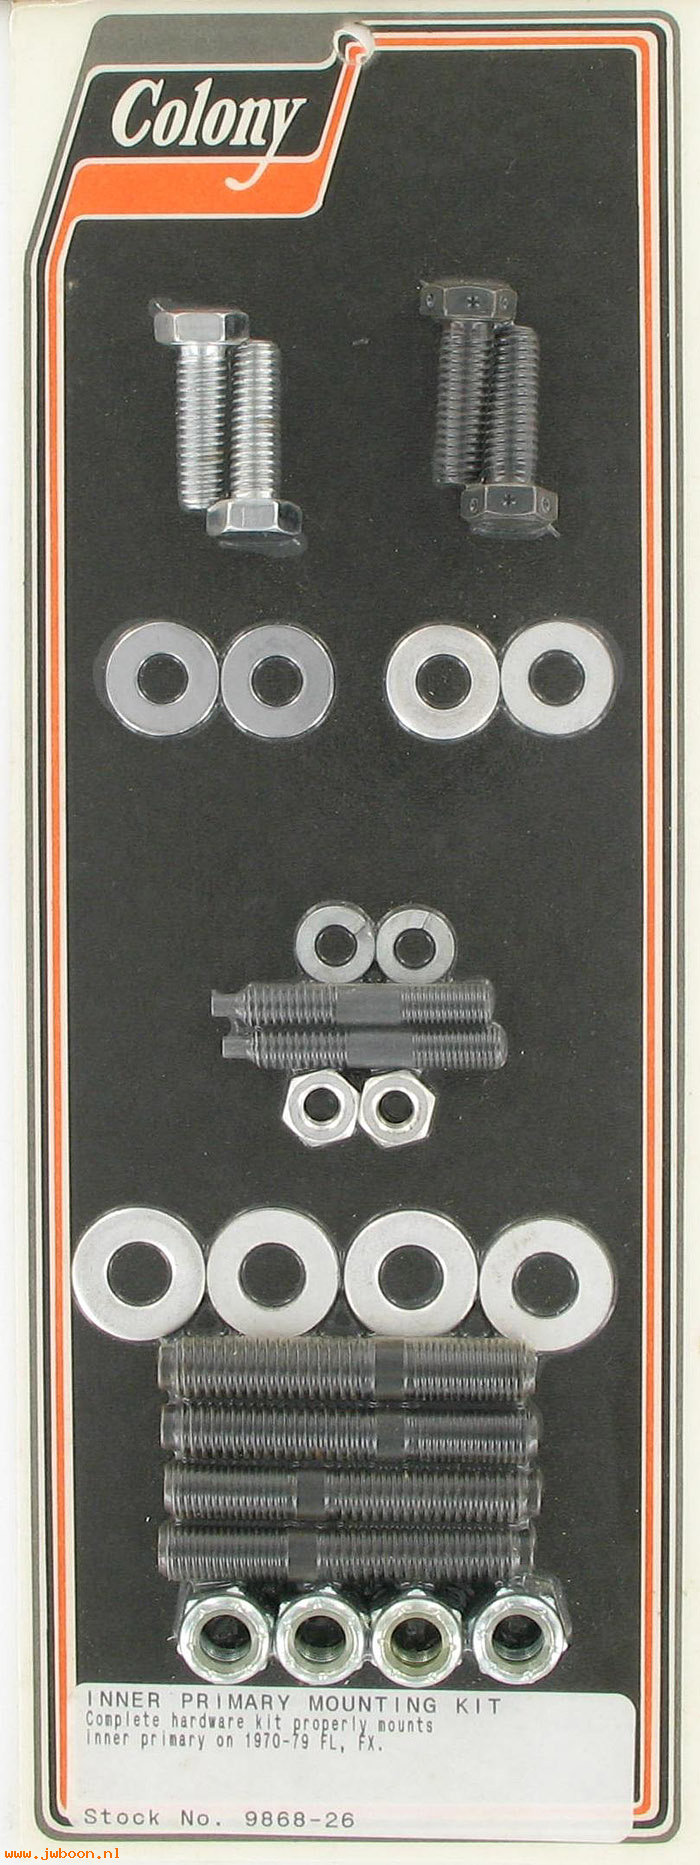 C 9868-26 (24811-59A / 4021): Inner primary mounting kit - Big Twins FL, FX '70-'79, in stock